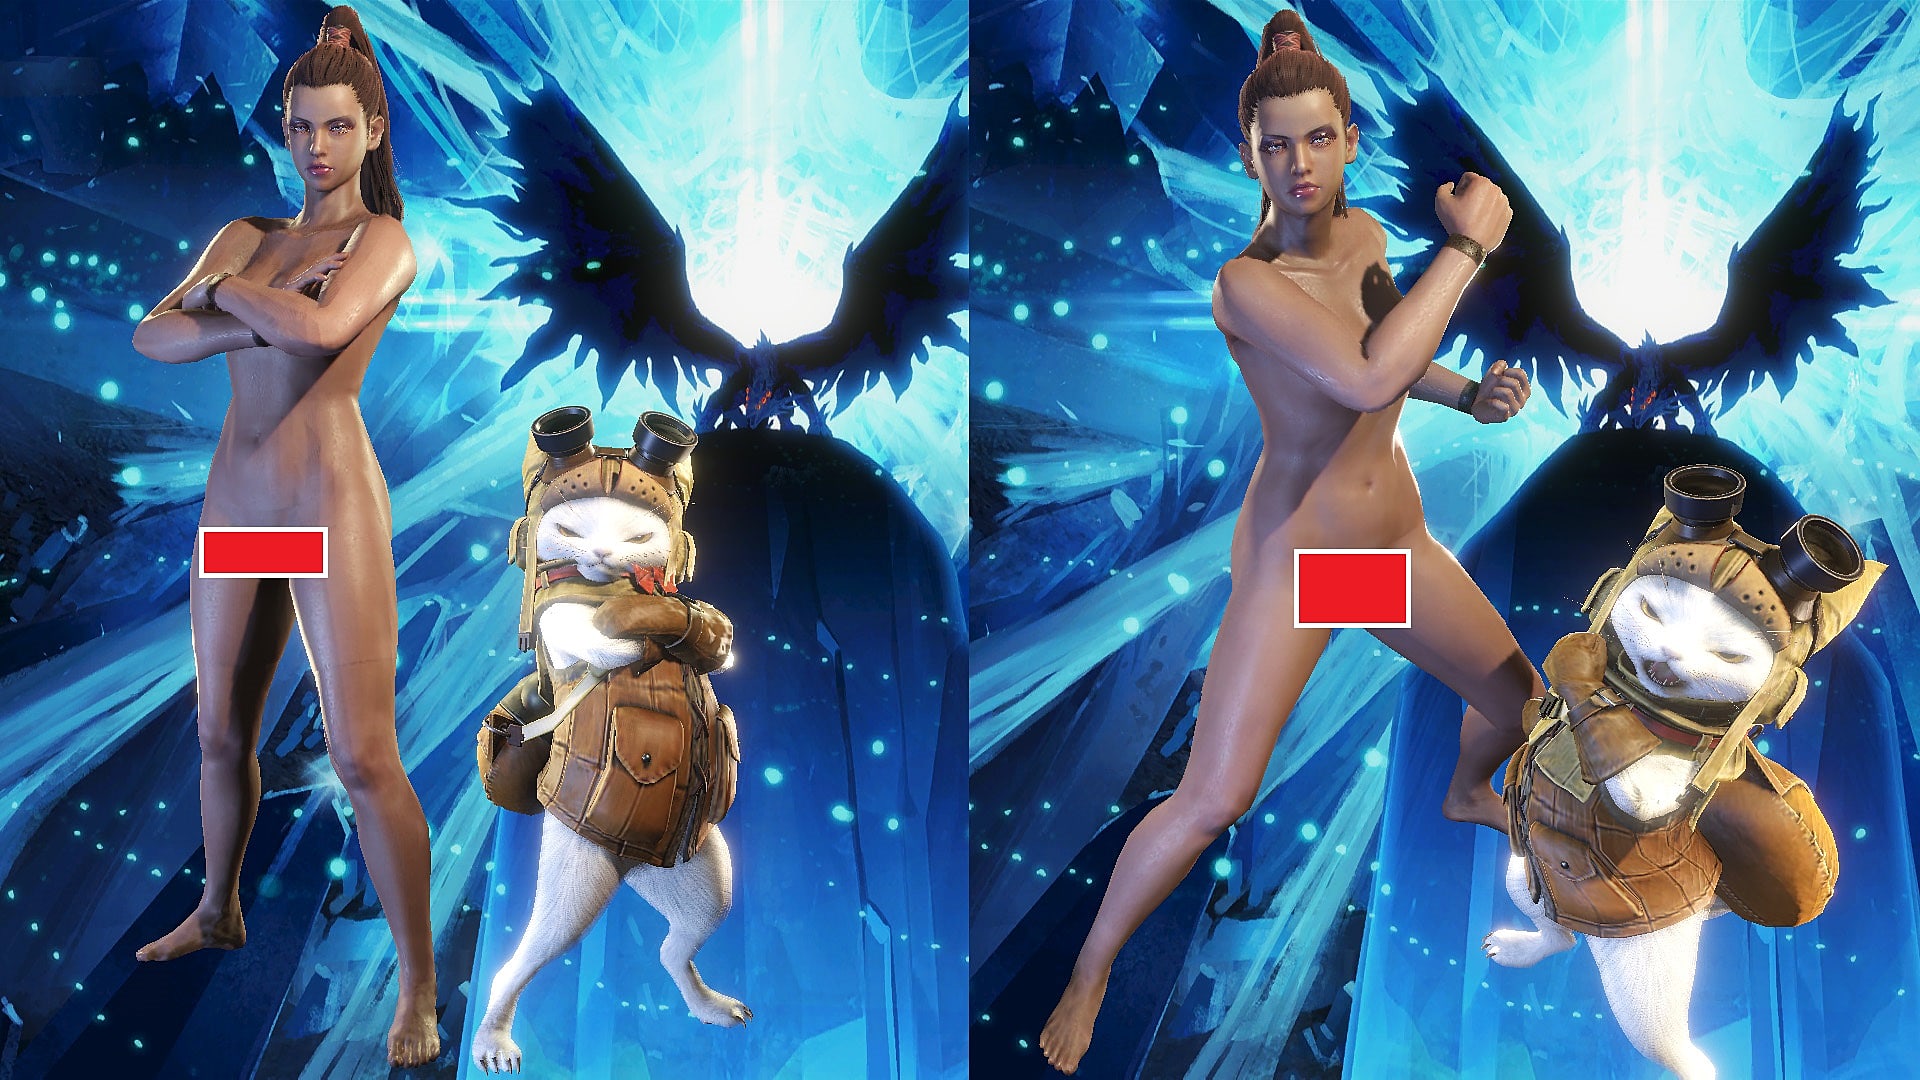 Firemouth reccomend monster hunter nude mod